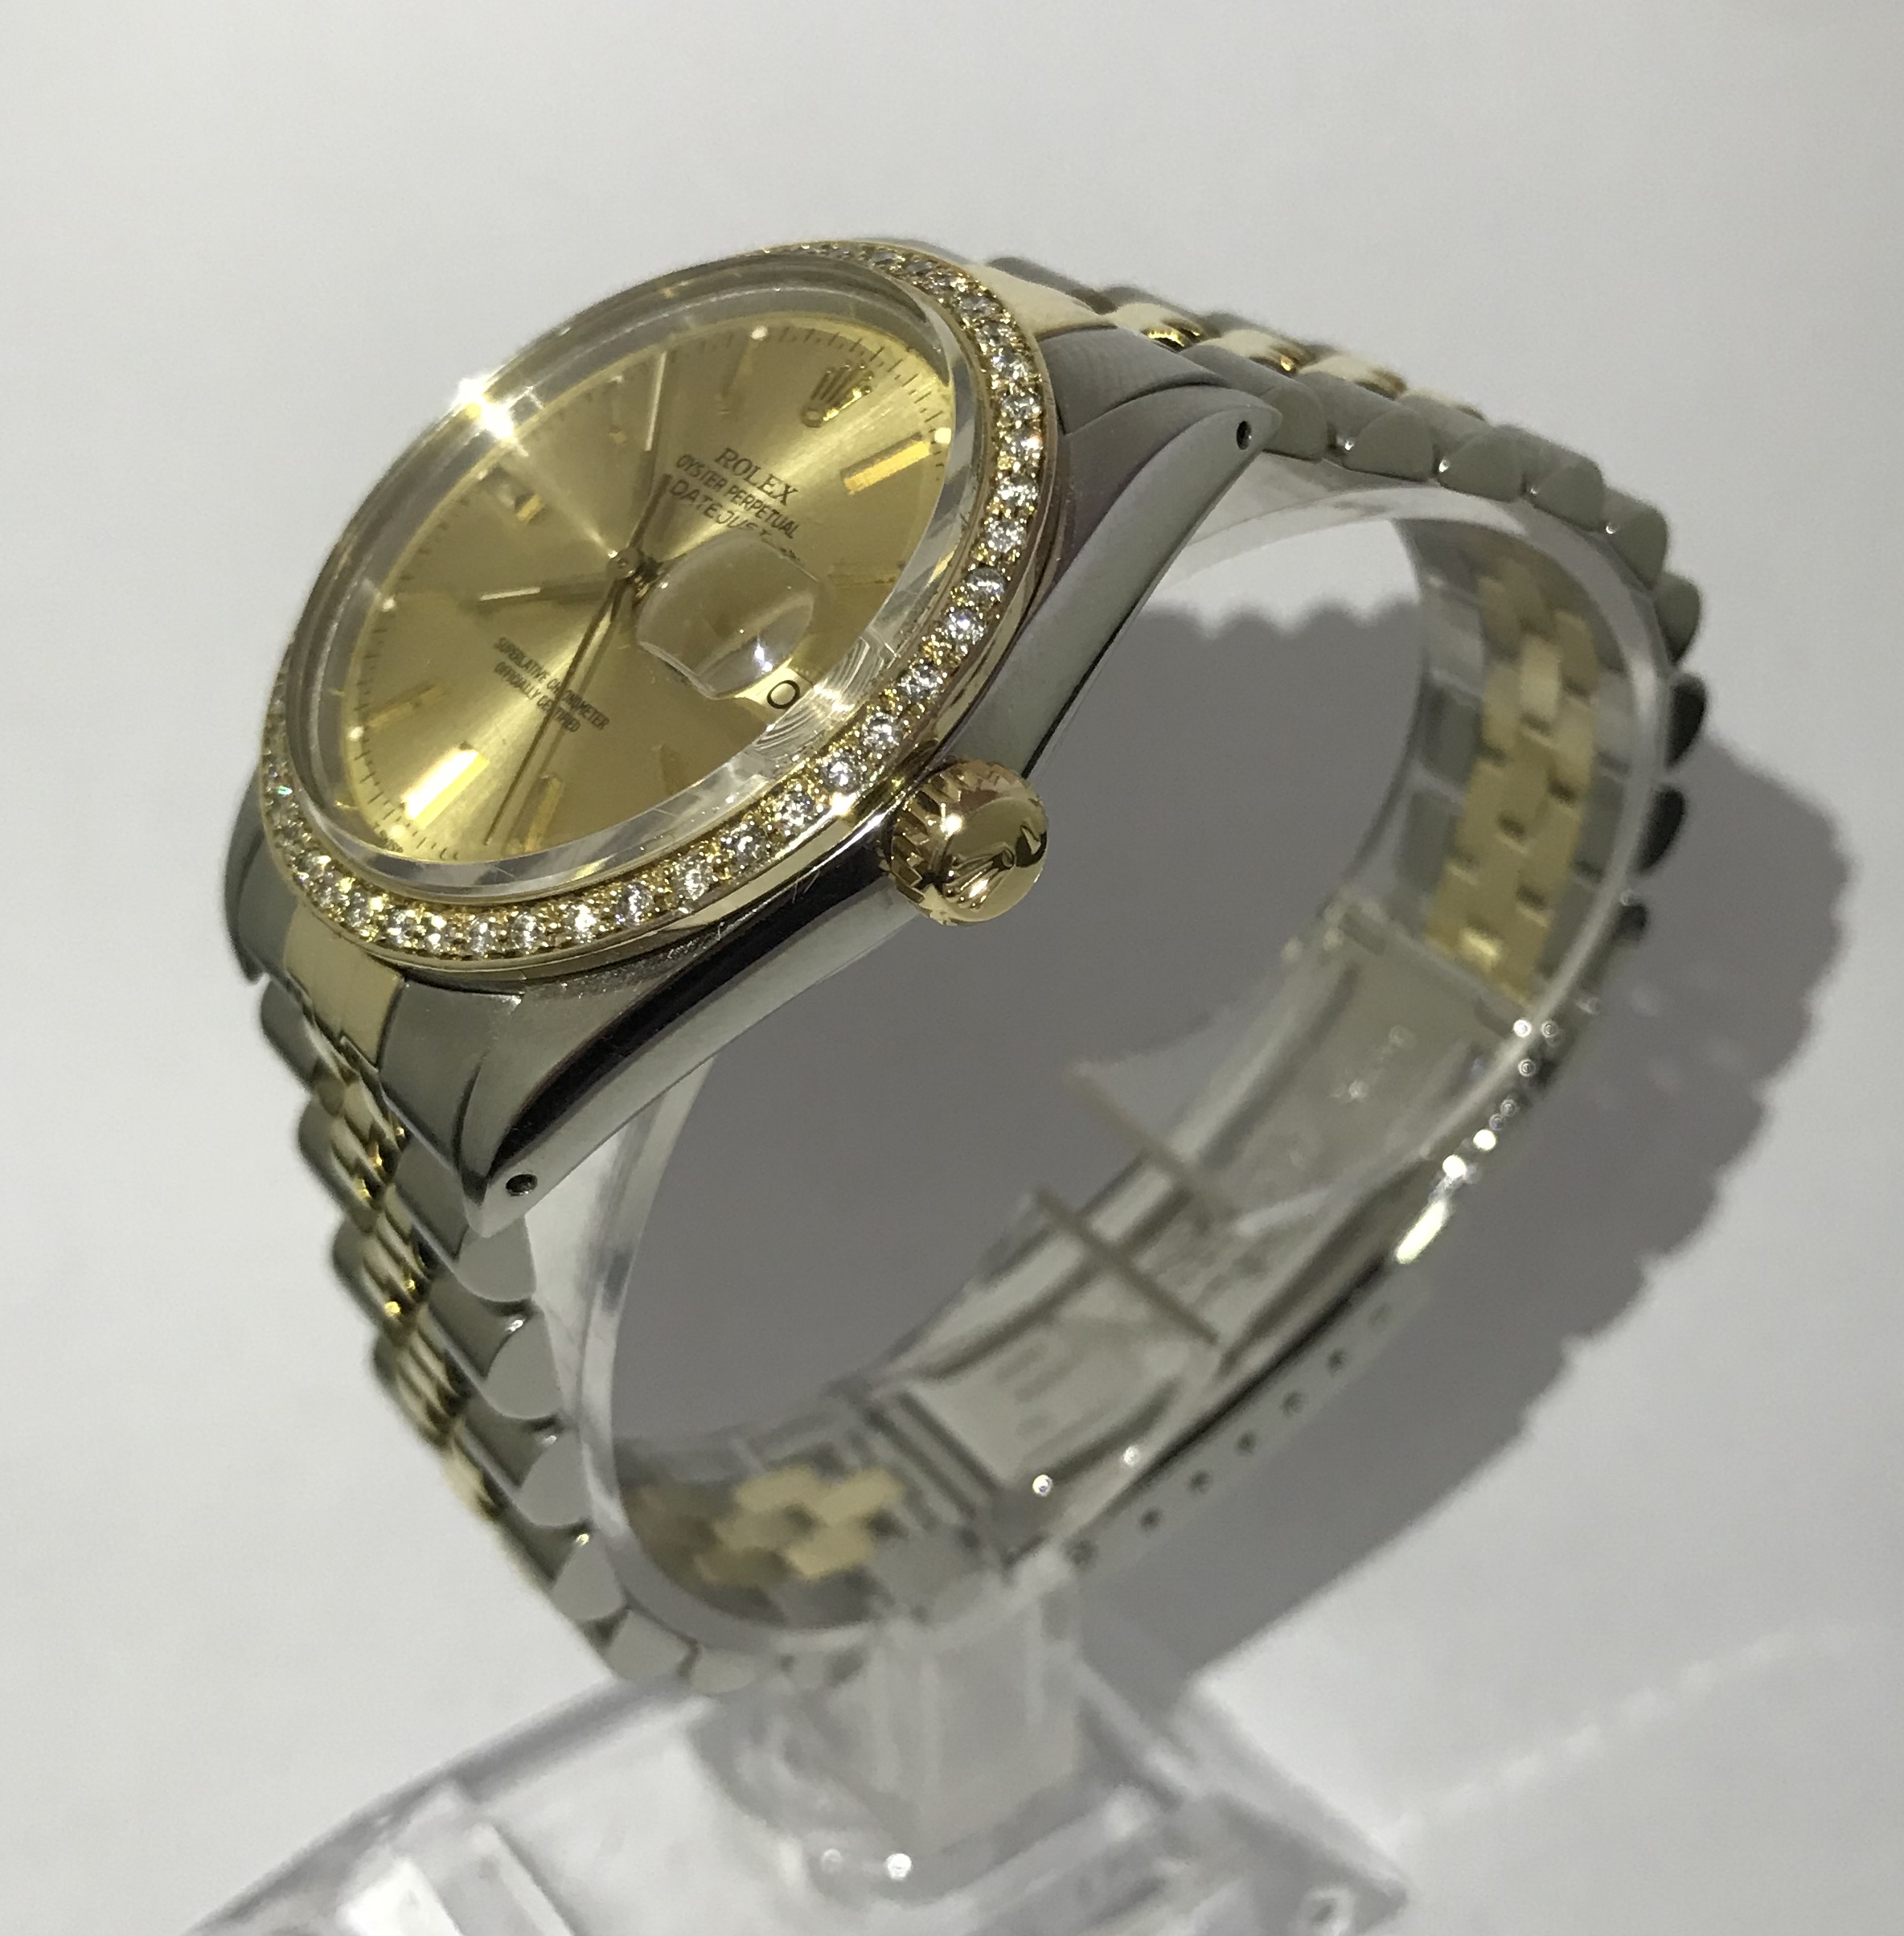 Gents Rolex Datejust 16013 18k Gold & Stainless Steel & Diamond - Image 4 of 8